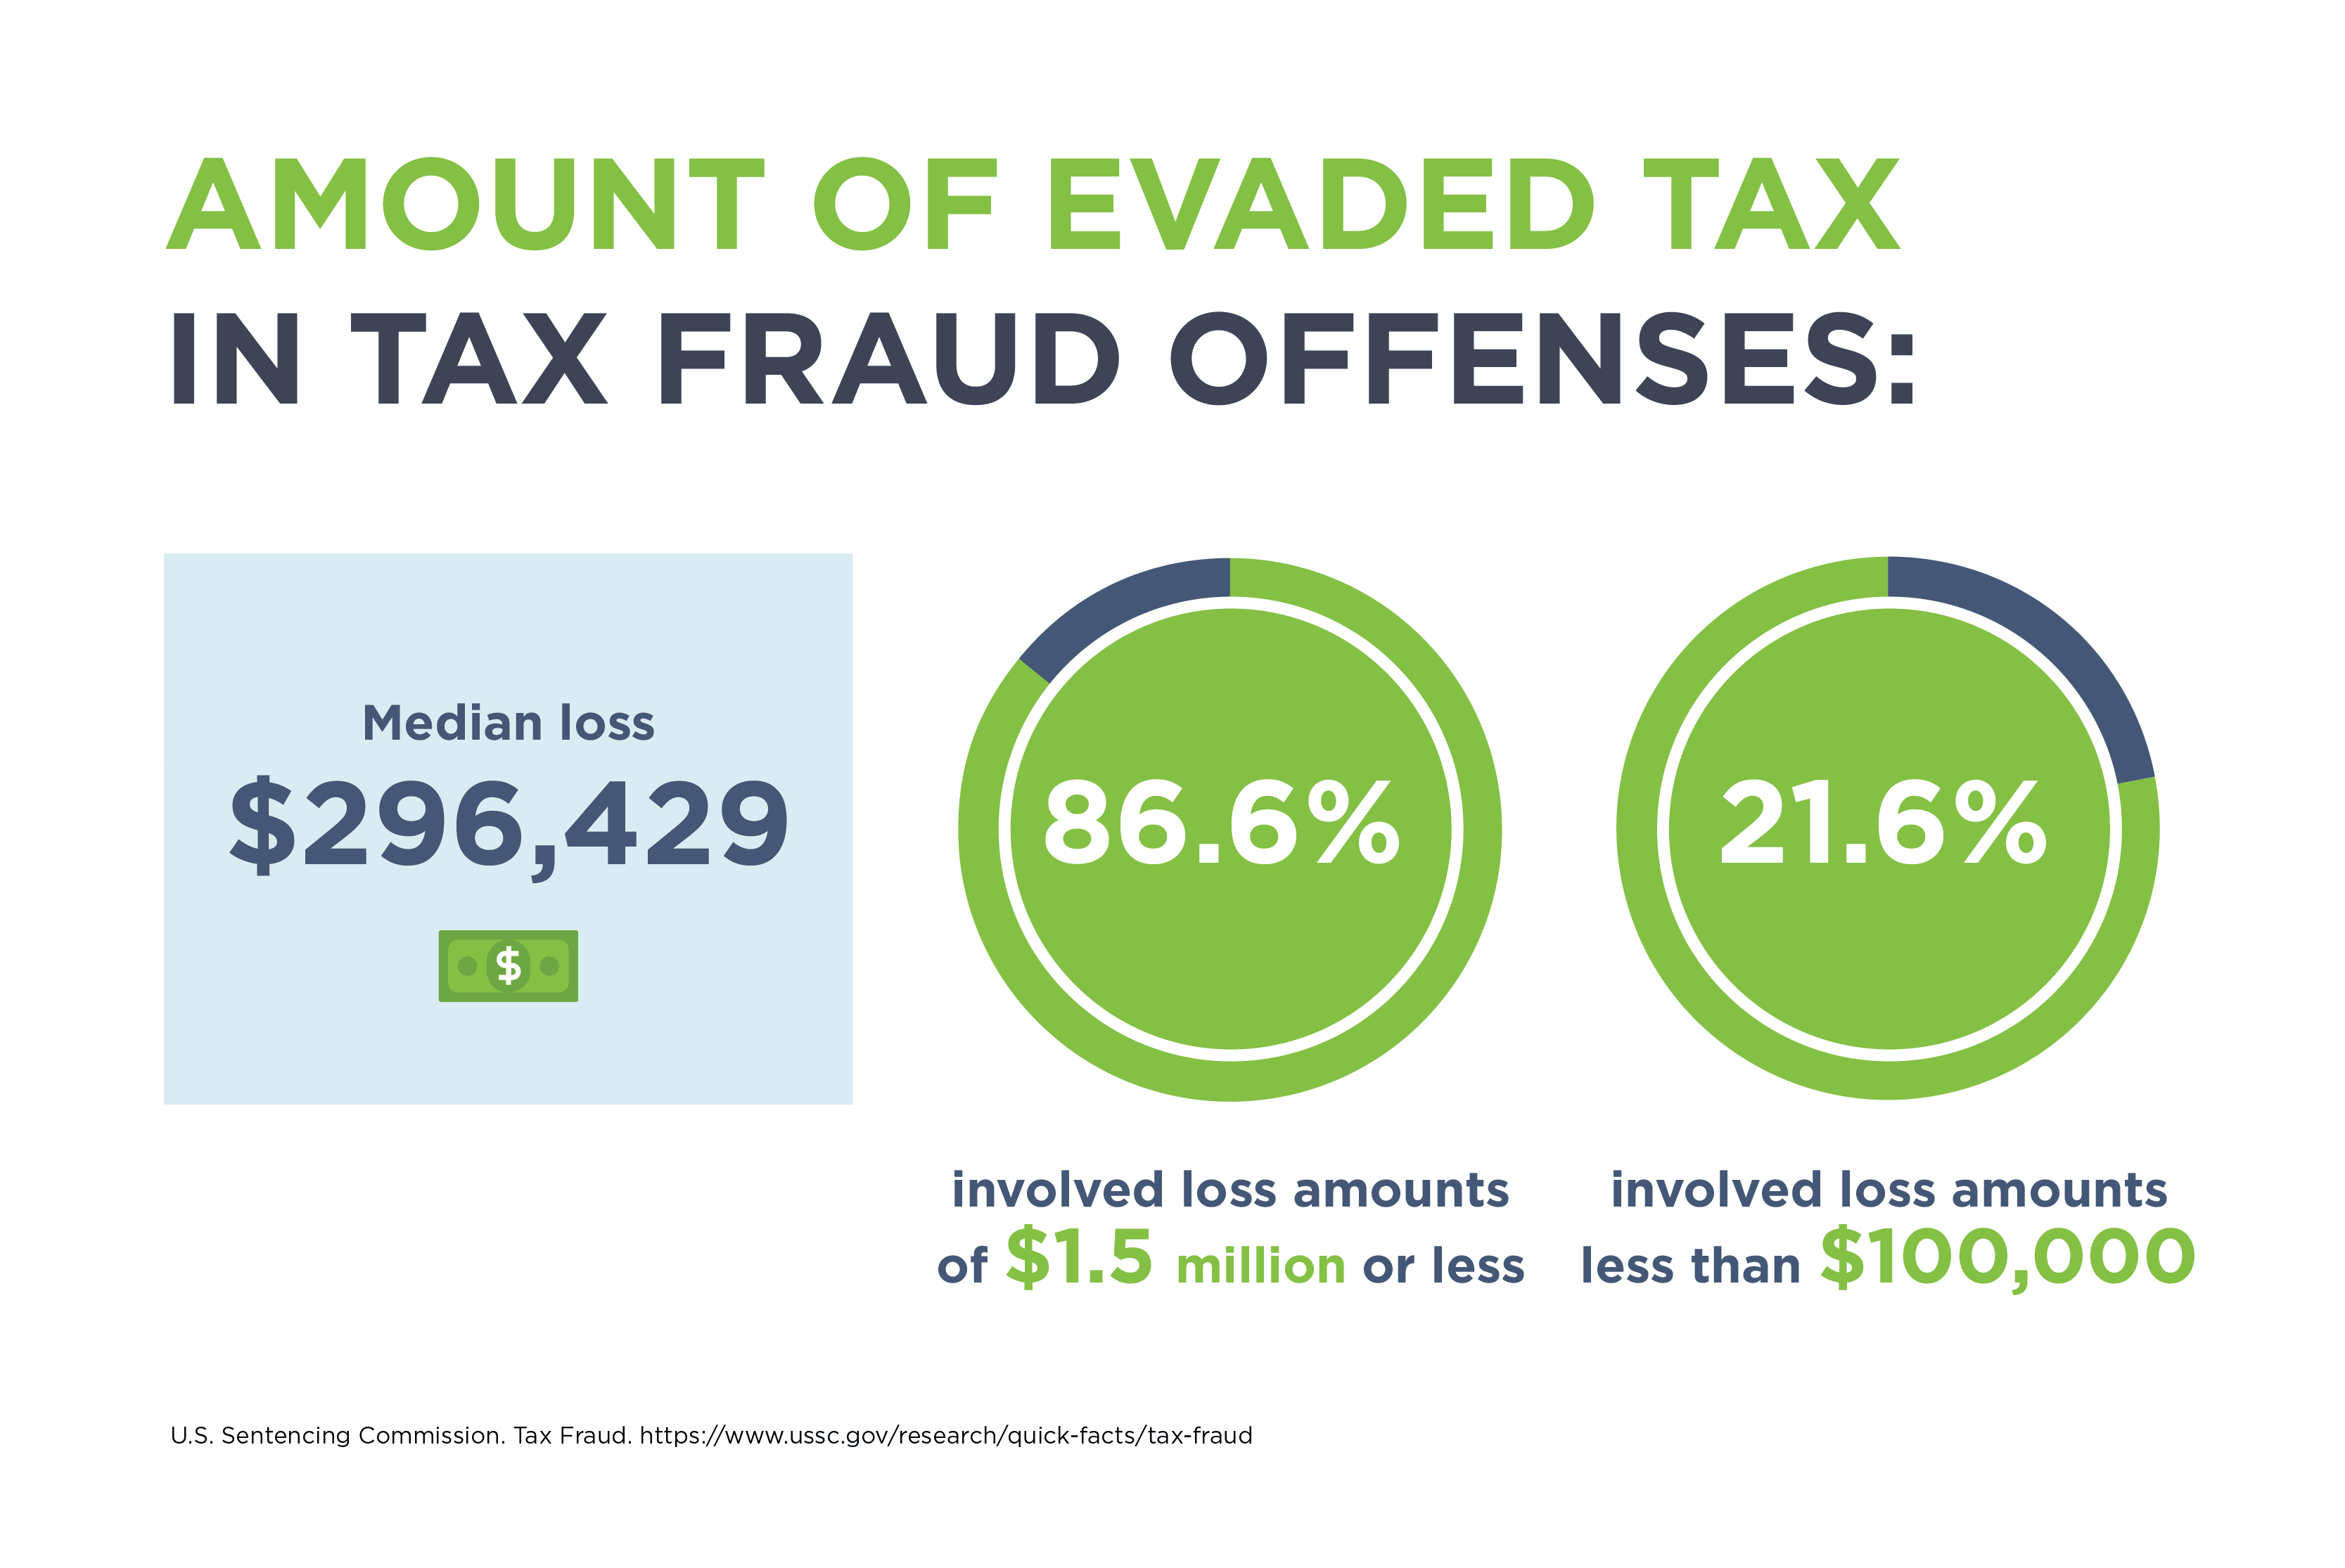 Illustration showing amount of evaded tax in tax fraud offenses.